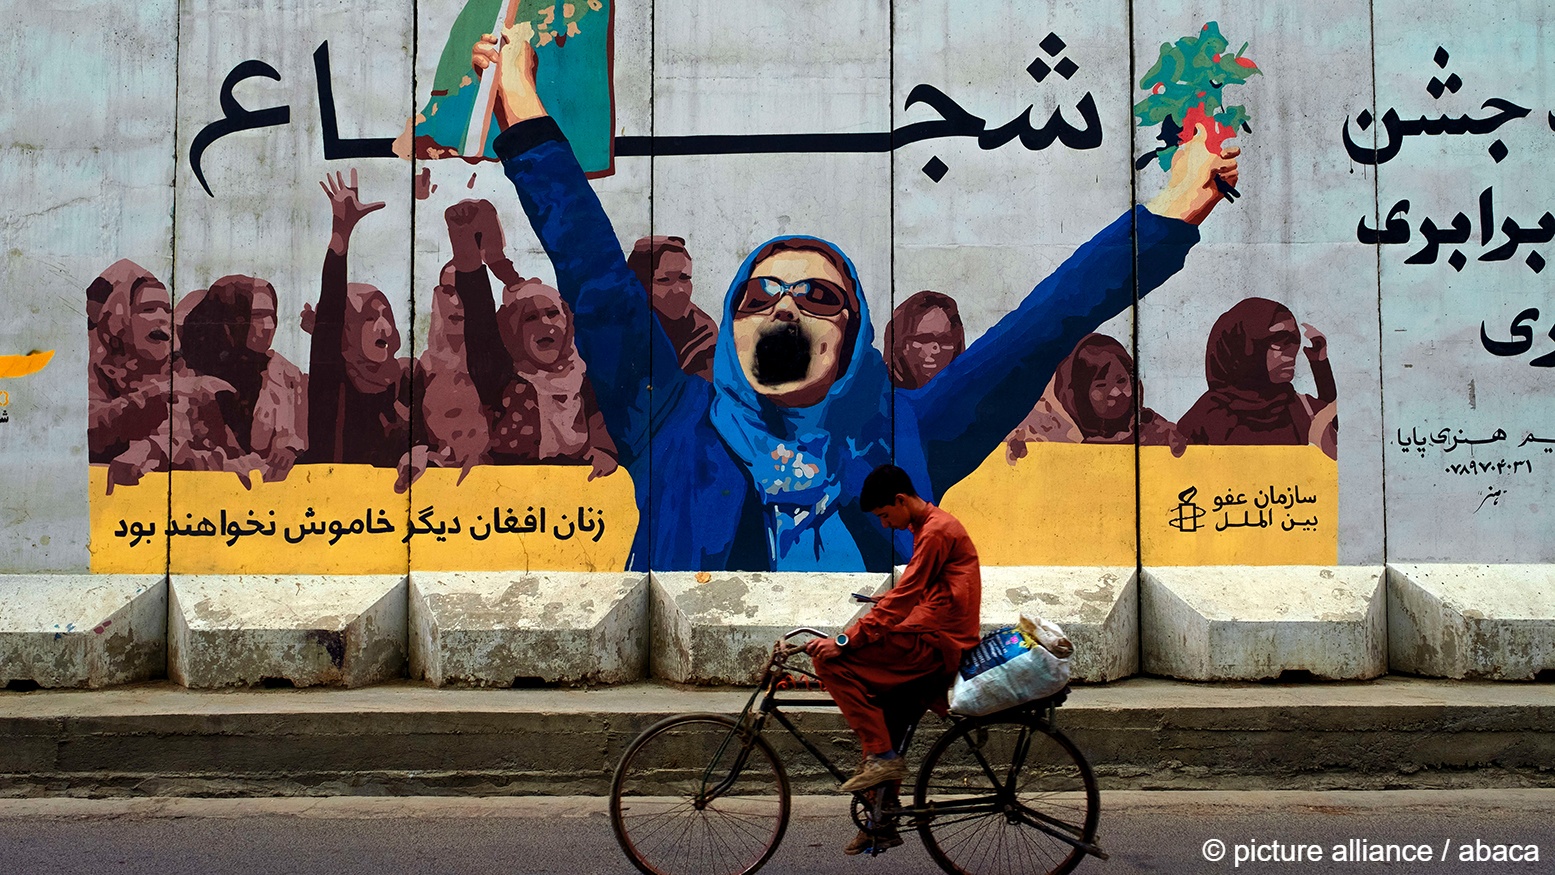 Graffiti in Kabul; the woman's mouth is blacked out. She has no voice (photo: picture-alliance/abaca)